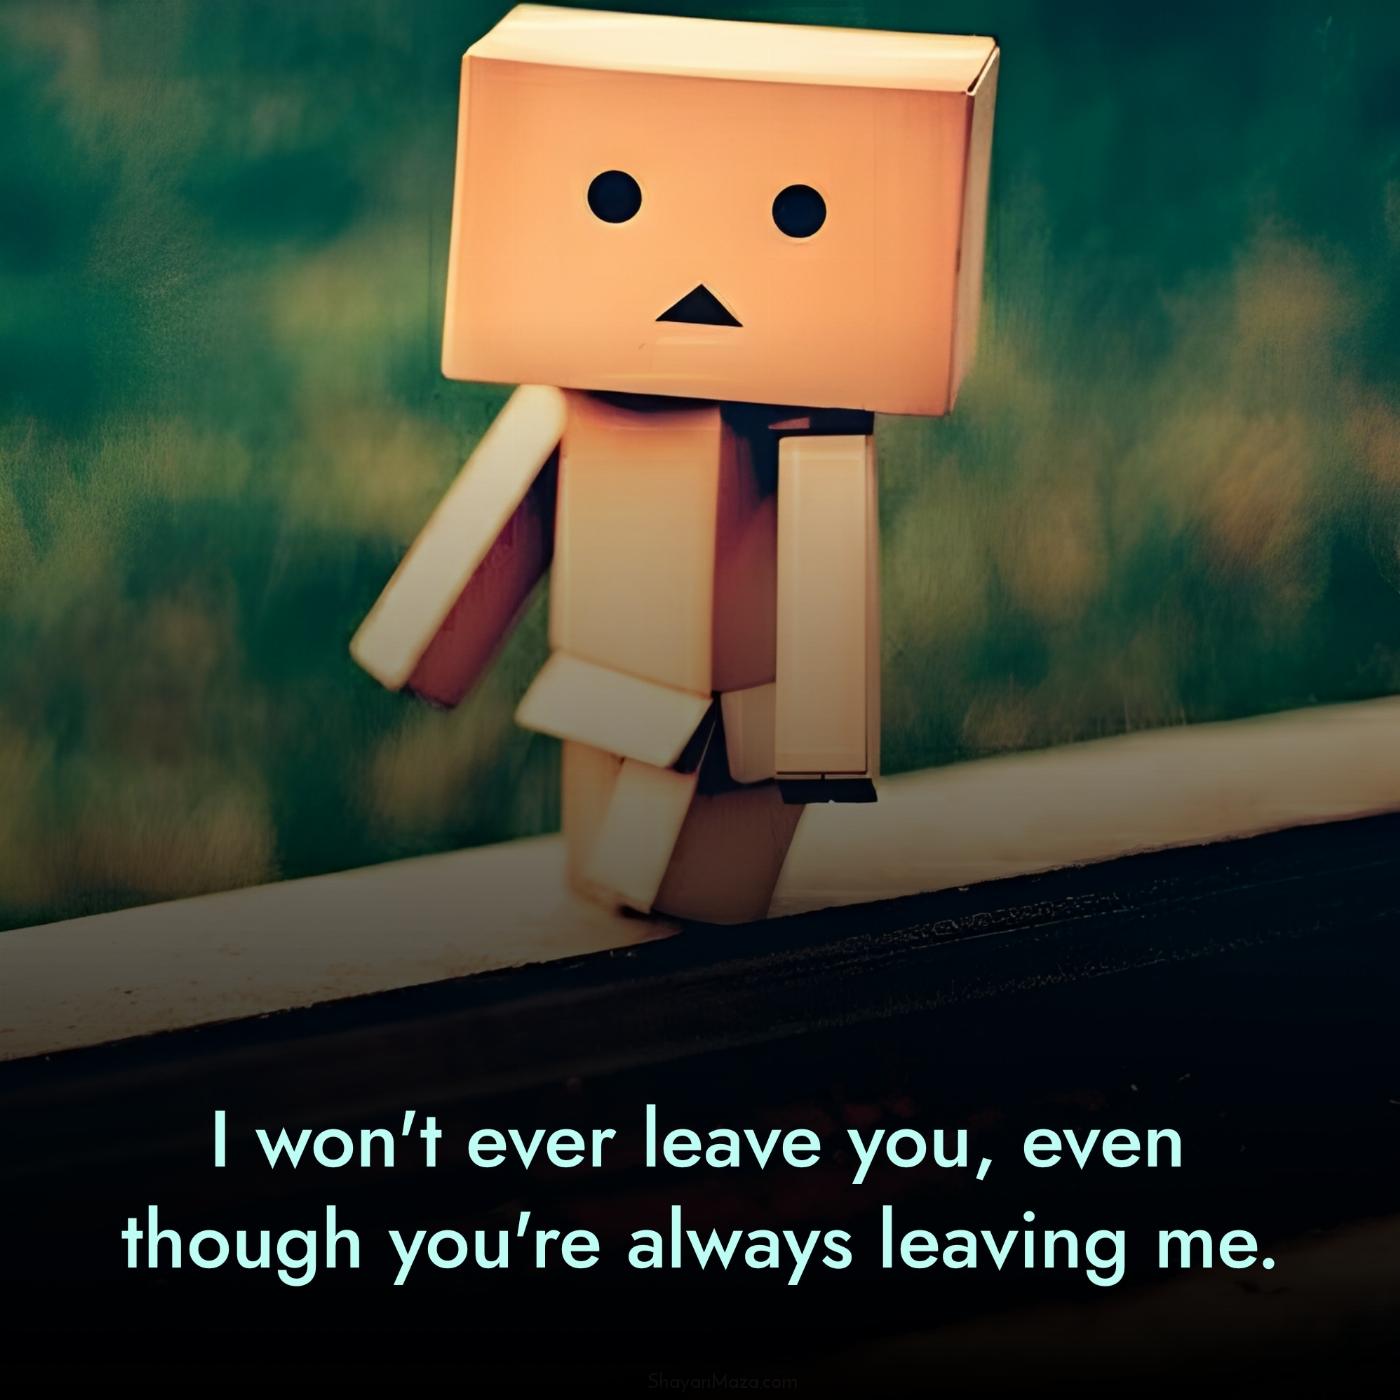 I won't ever leave you even though you're always leaving me